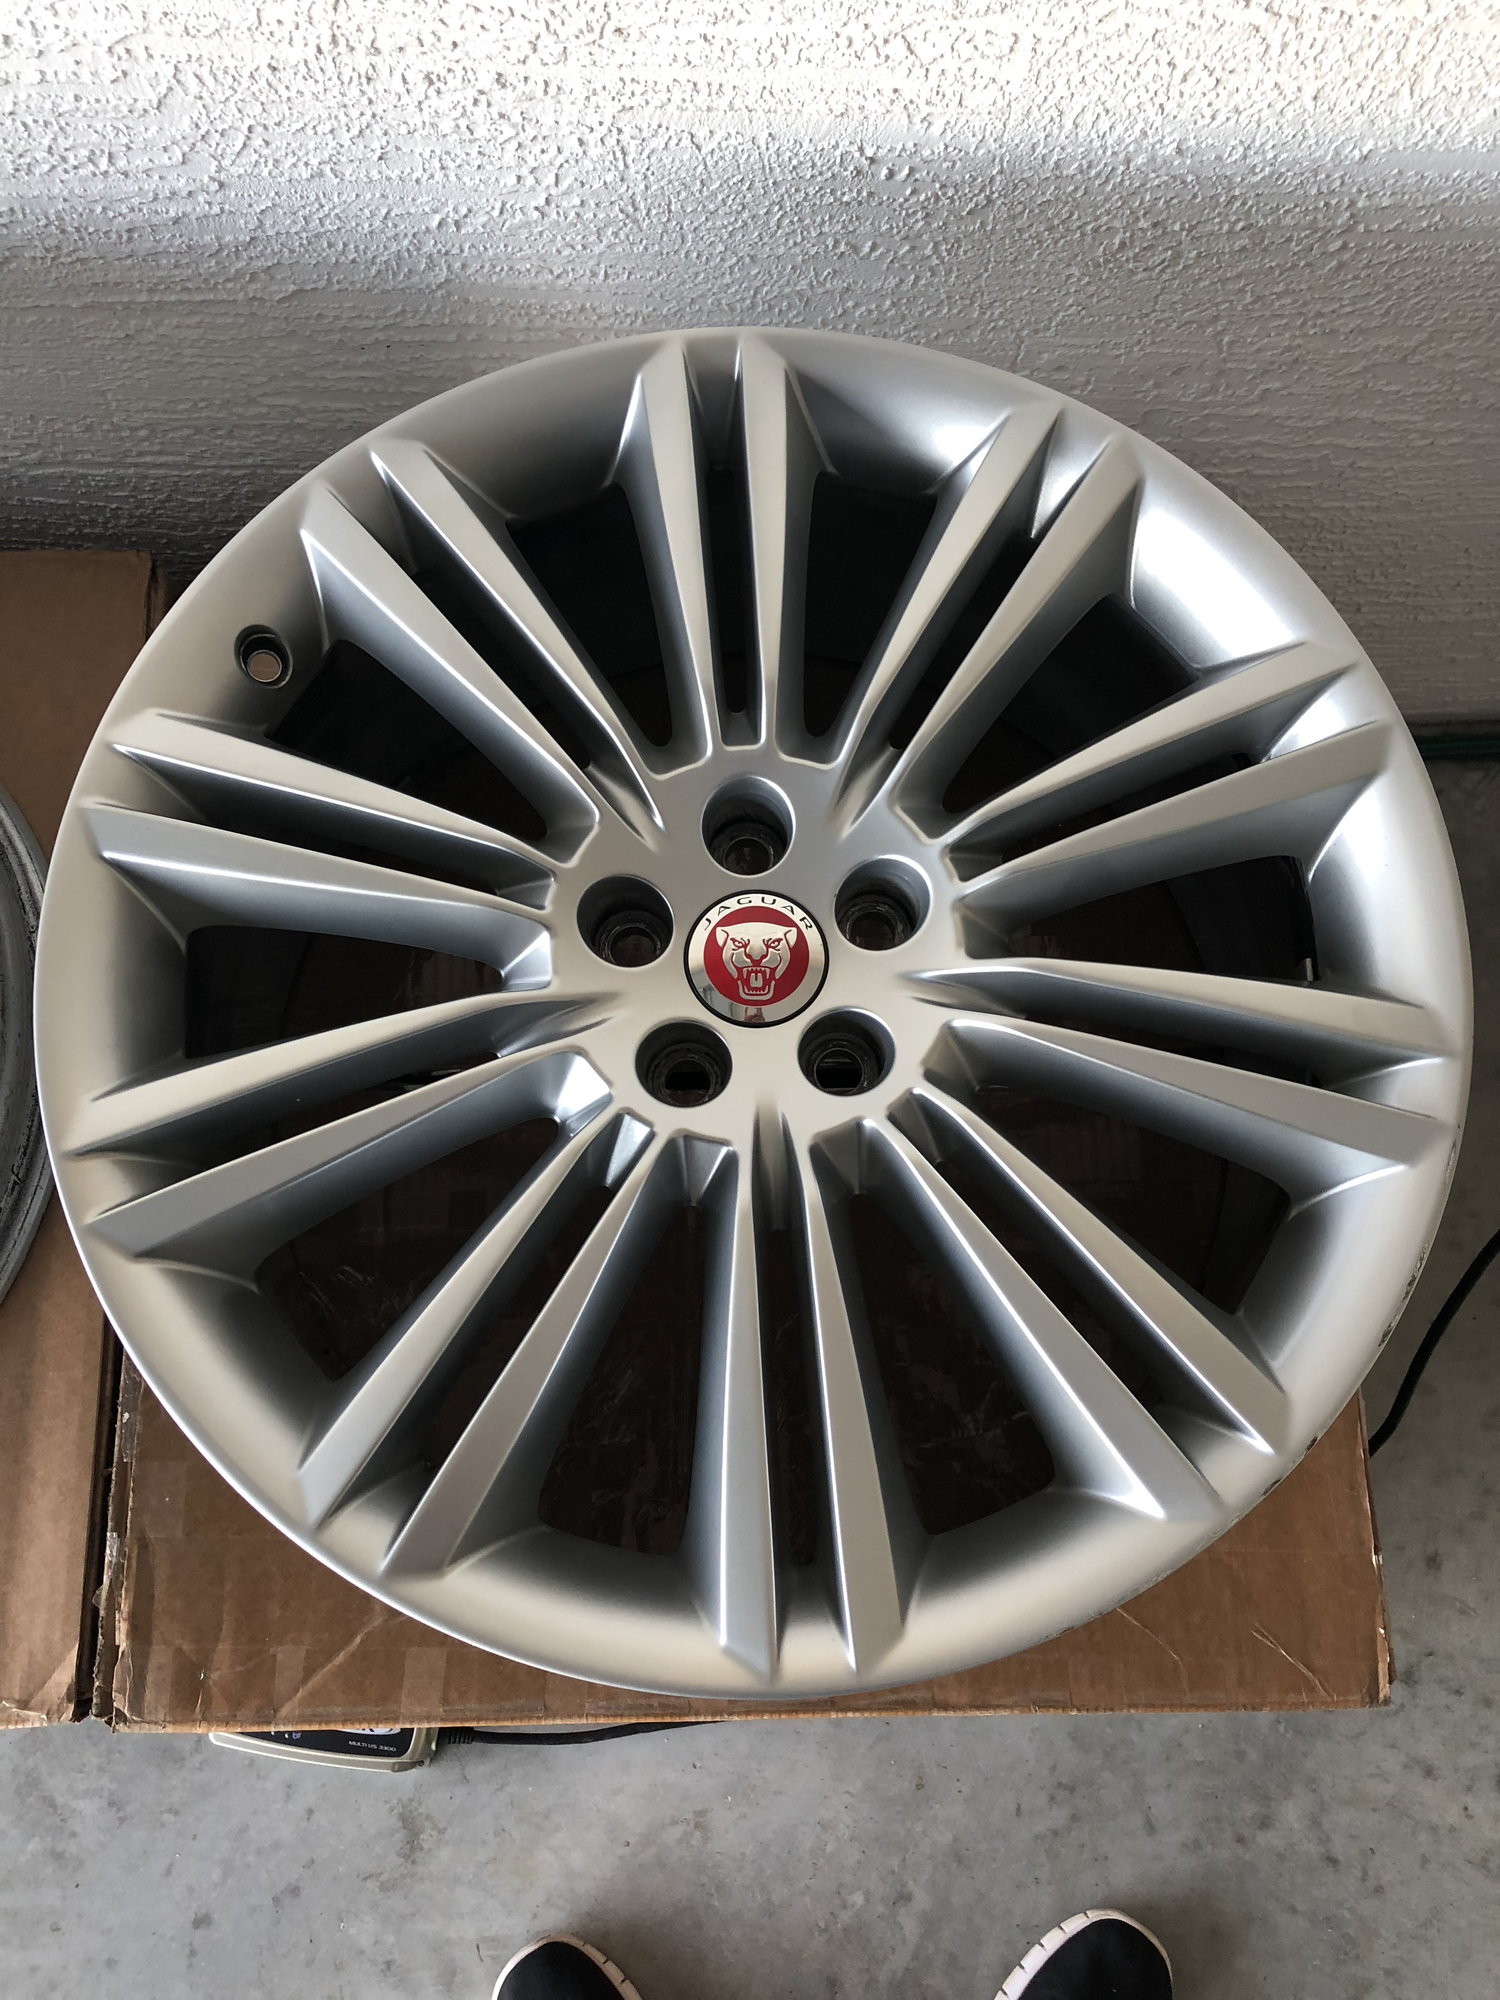 Wheels and Tires/Axles - Staggered set of 20" Kasuga wheels off my CPO XJ - Used - 2011 to 2018 Jaguar XJ - Brooksville, FL 34602, United States